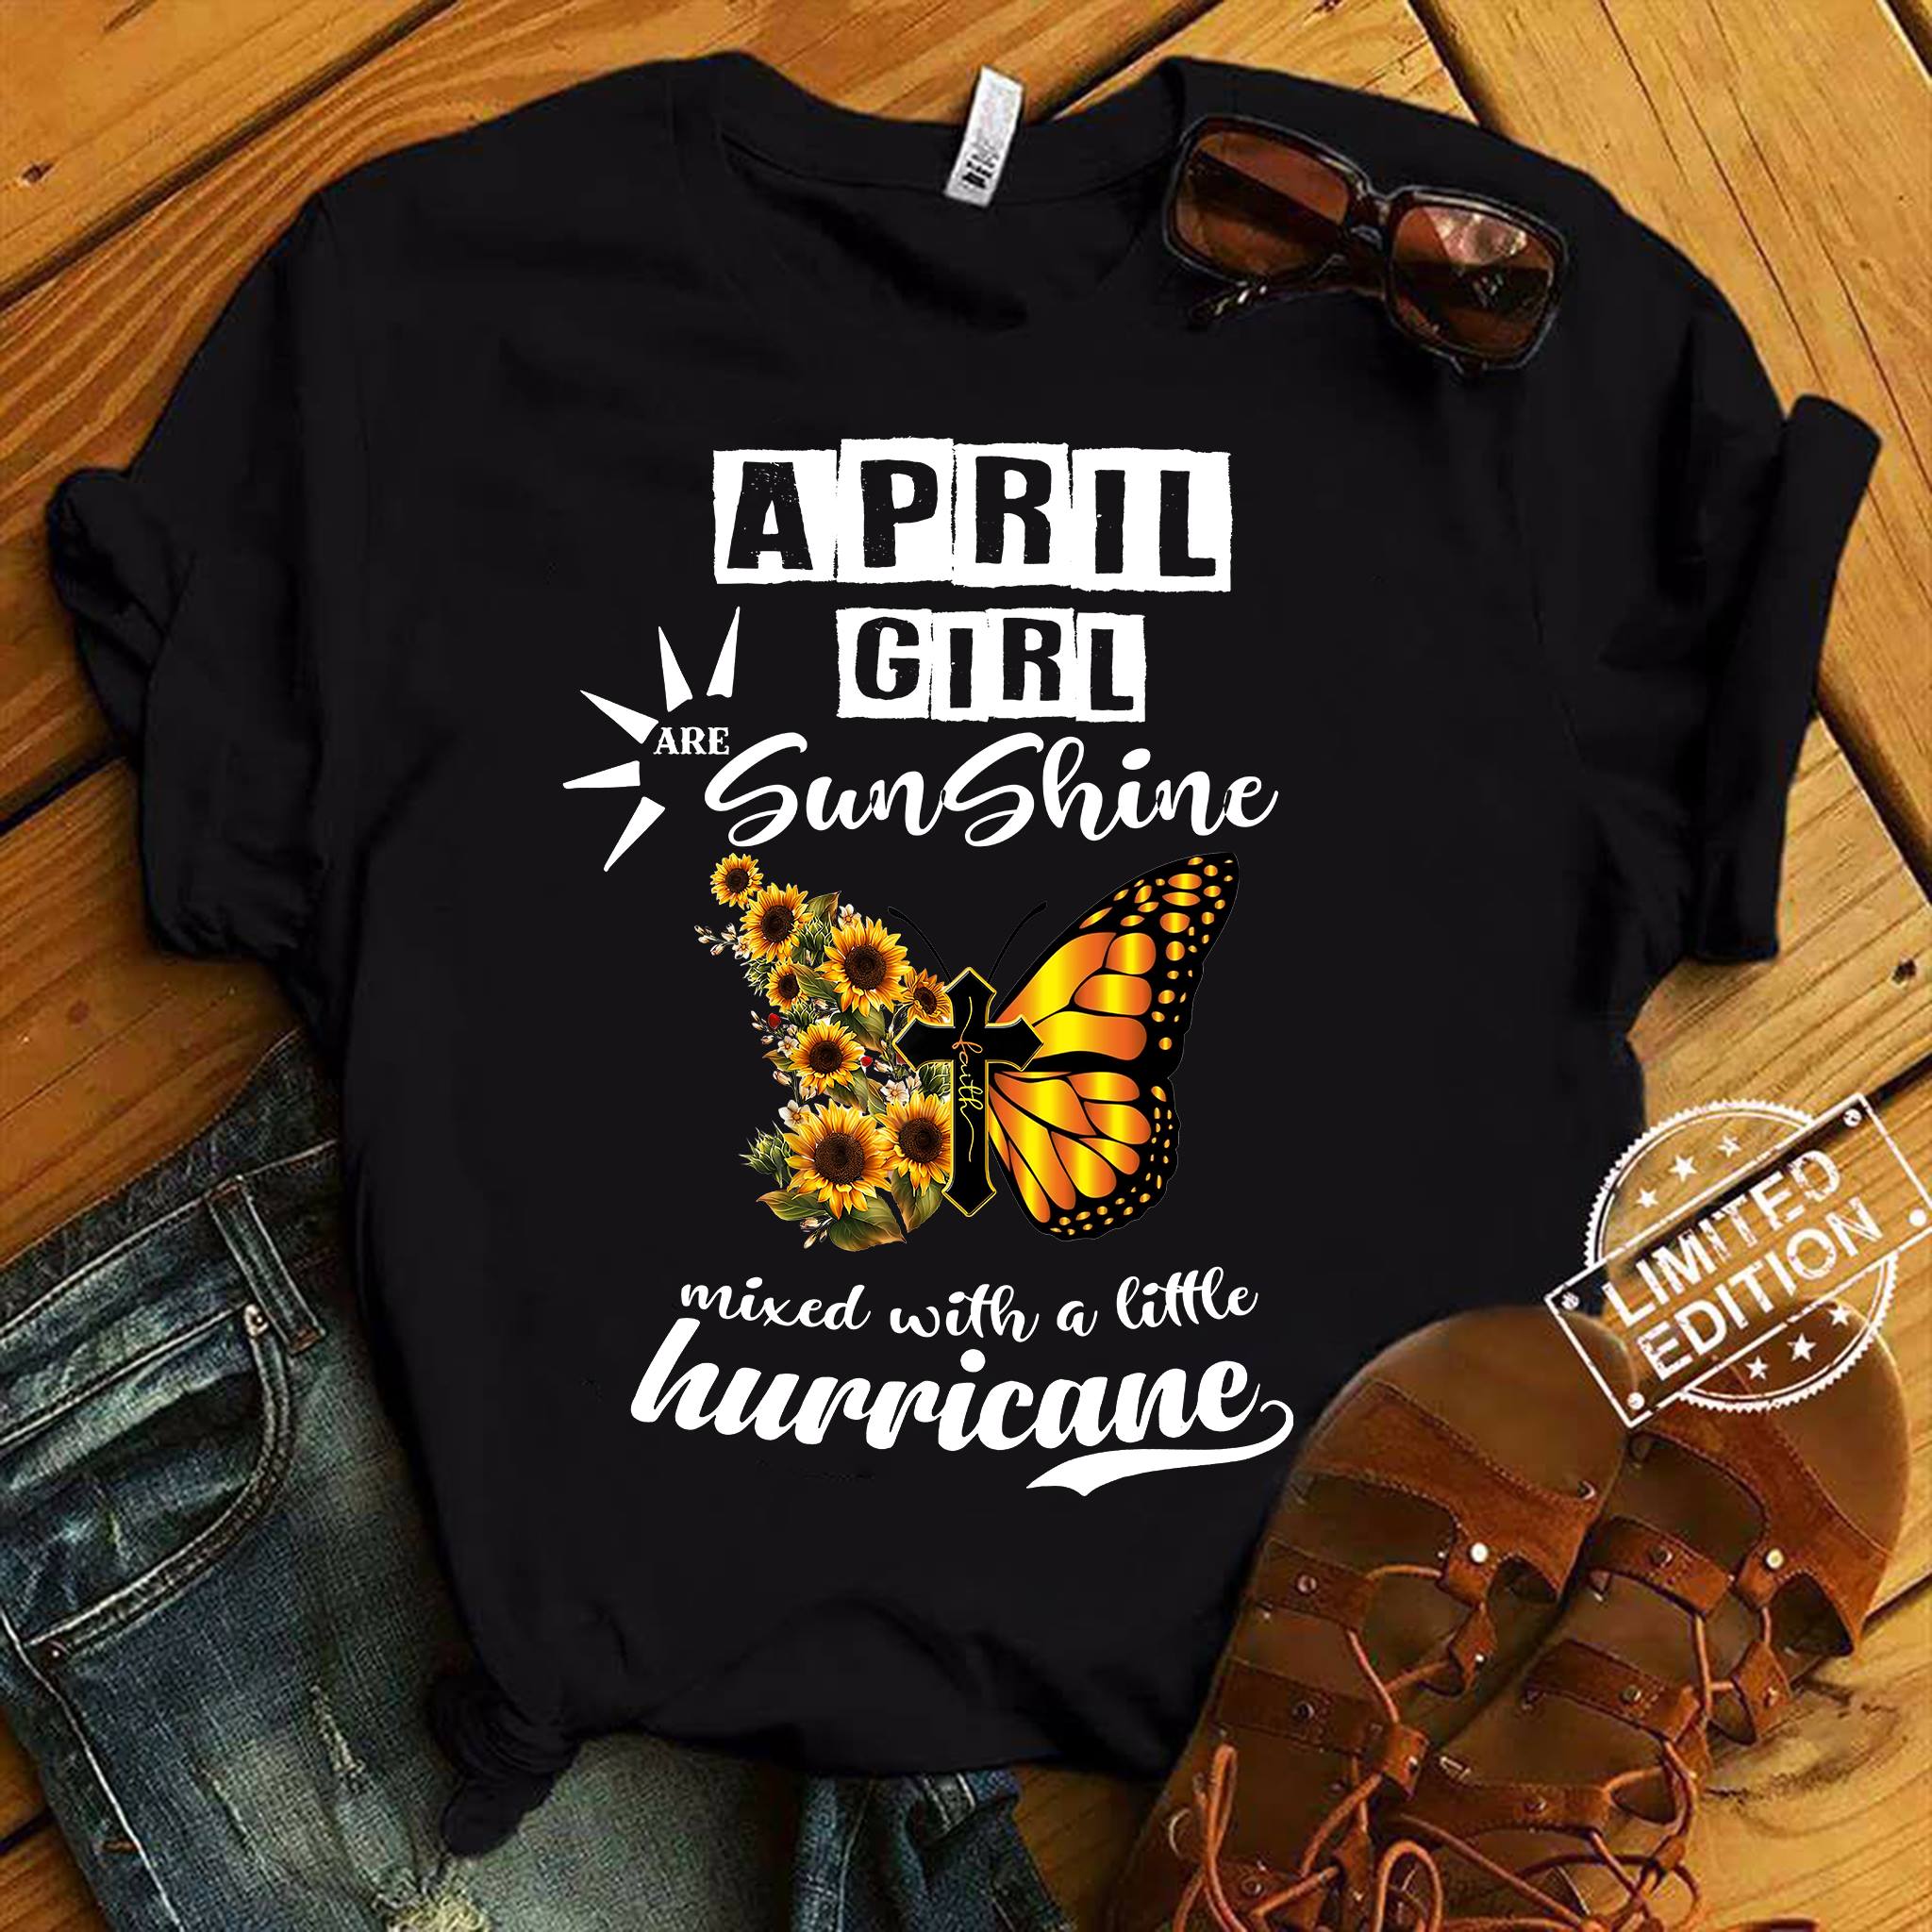 April girl are sunshine mixed with a little hurricane - Butterfly and sunflower